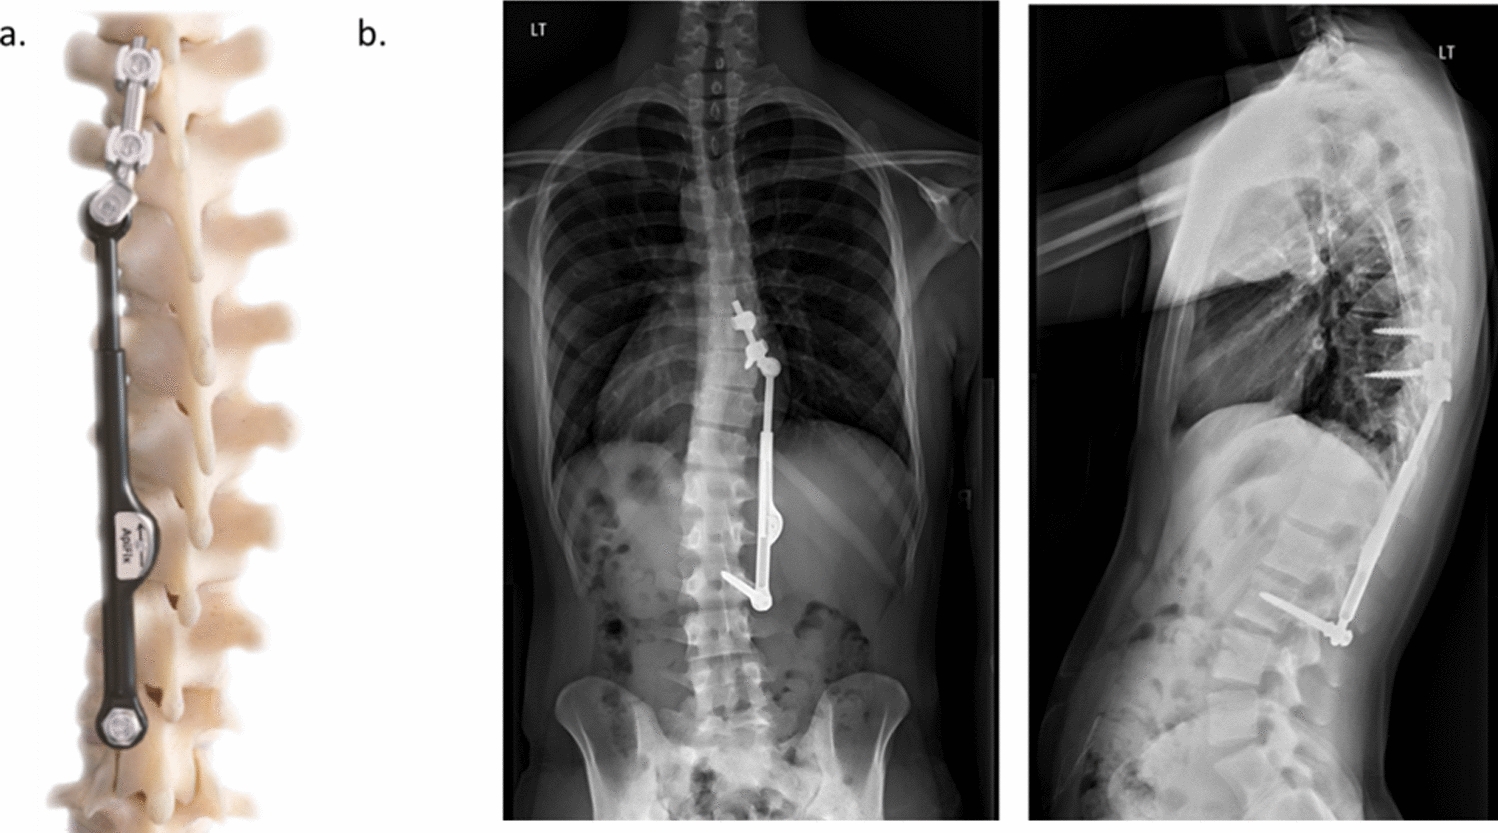 Tissue response following implantation with the posterior dynamic distraction device (PDDD) in adolescent idiopathic scoliosis (AIS)